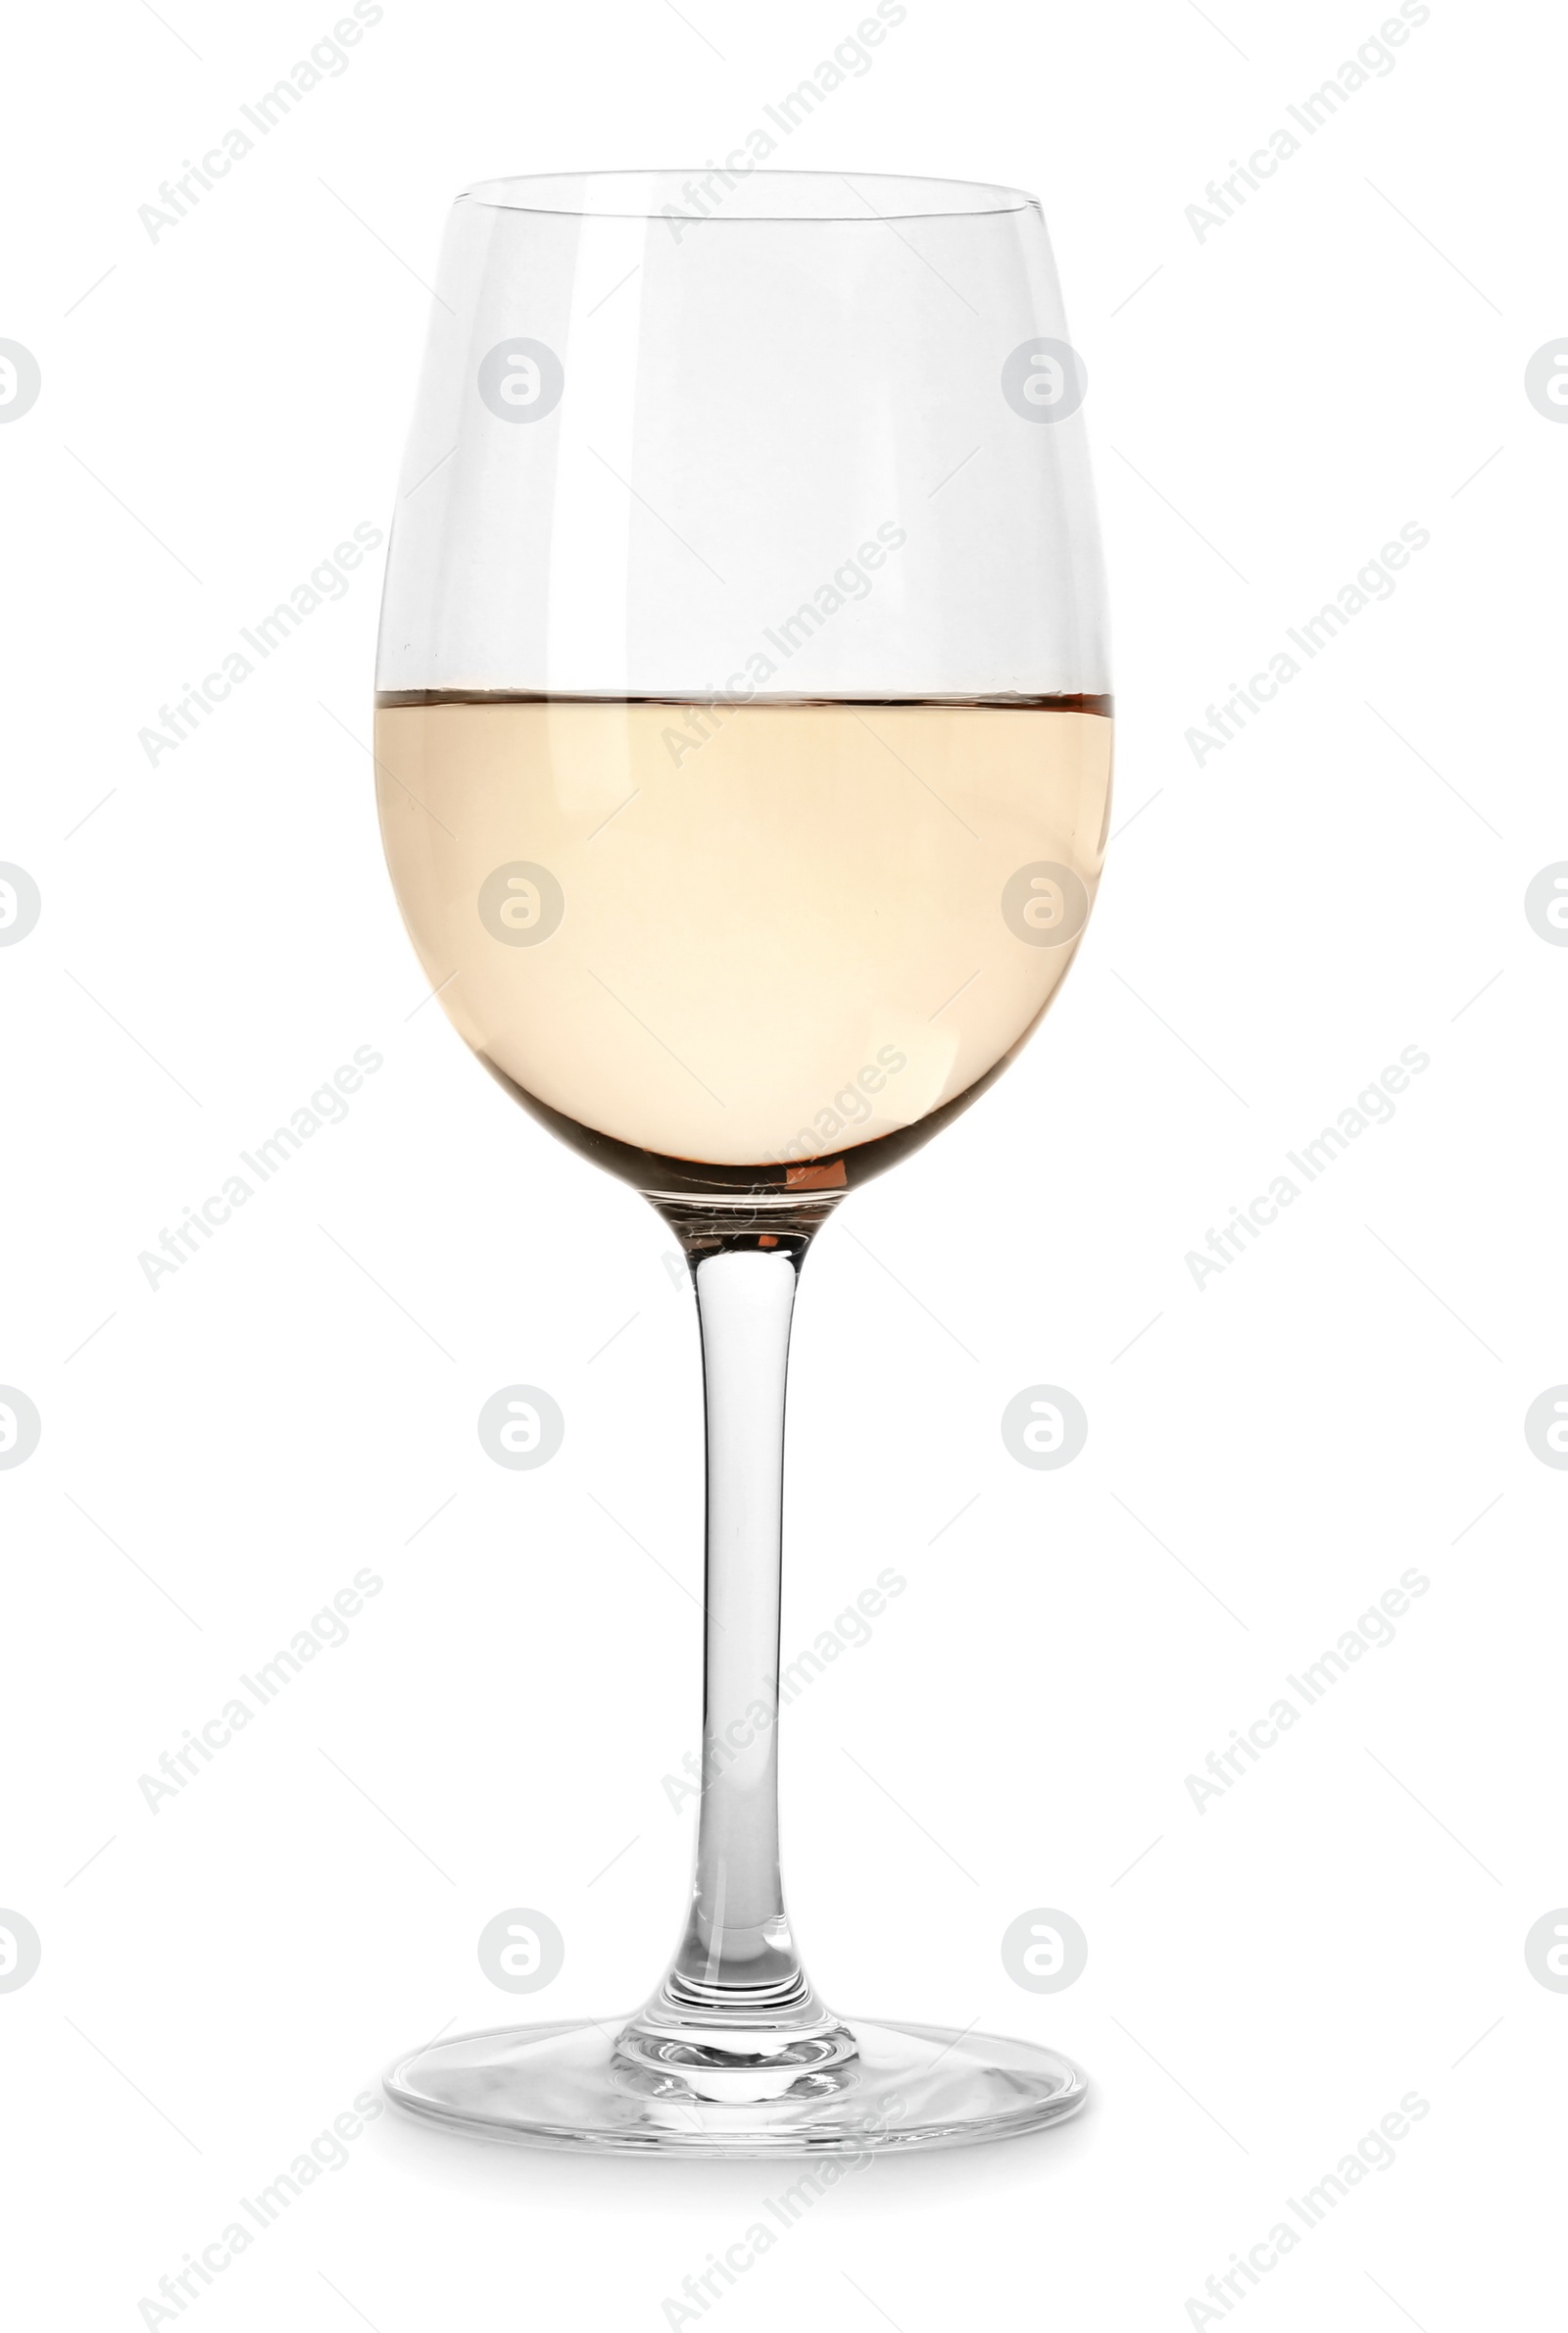 Photo of Glass of expensive wine on white background